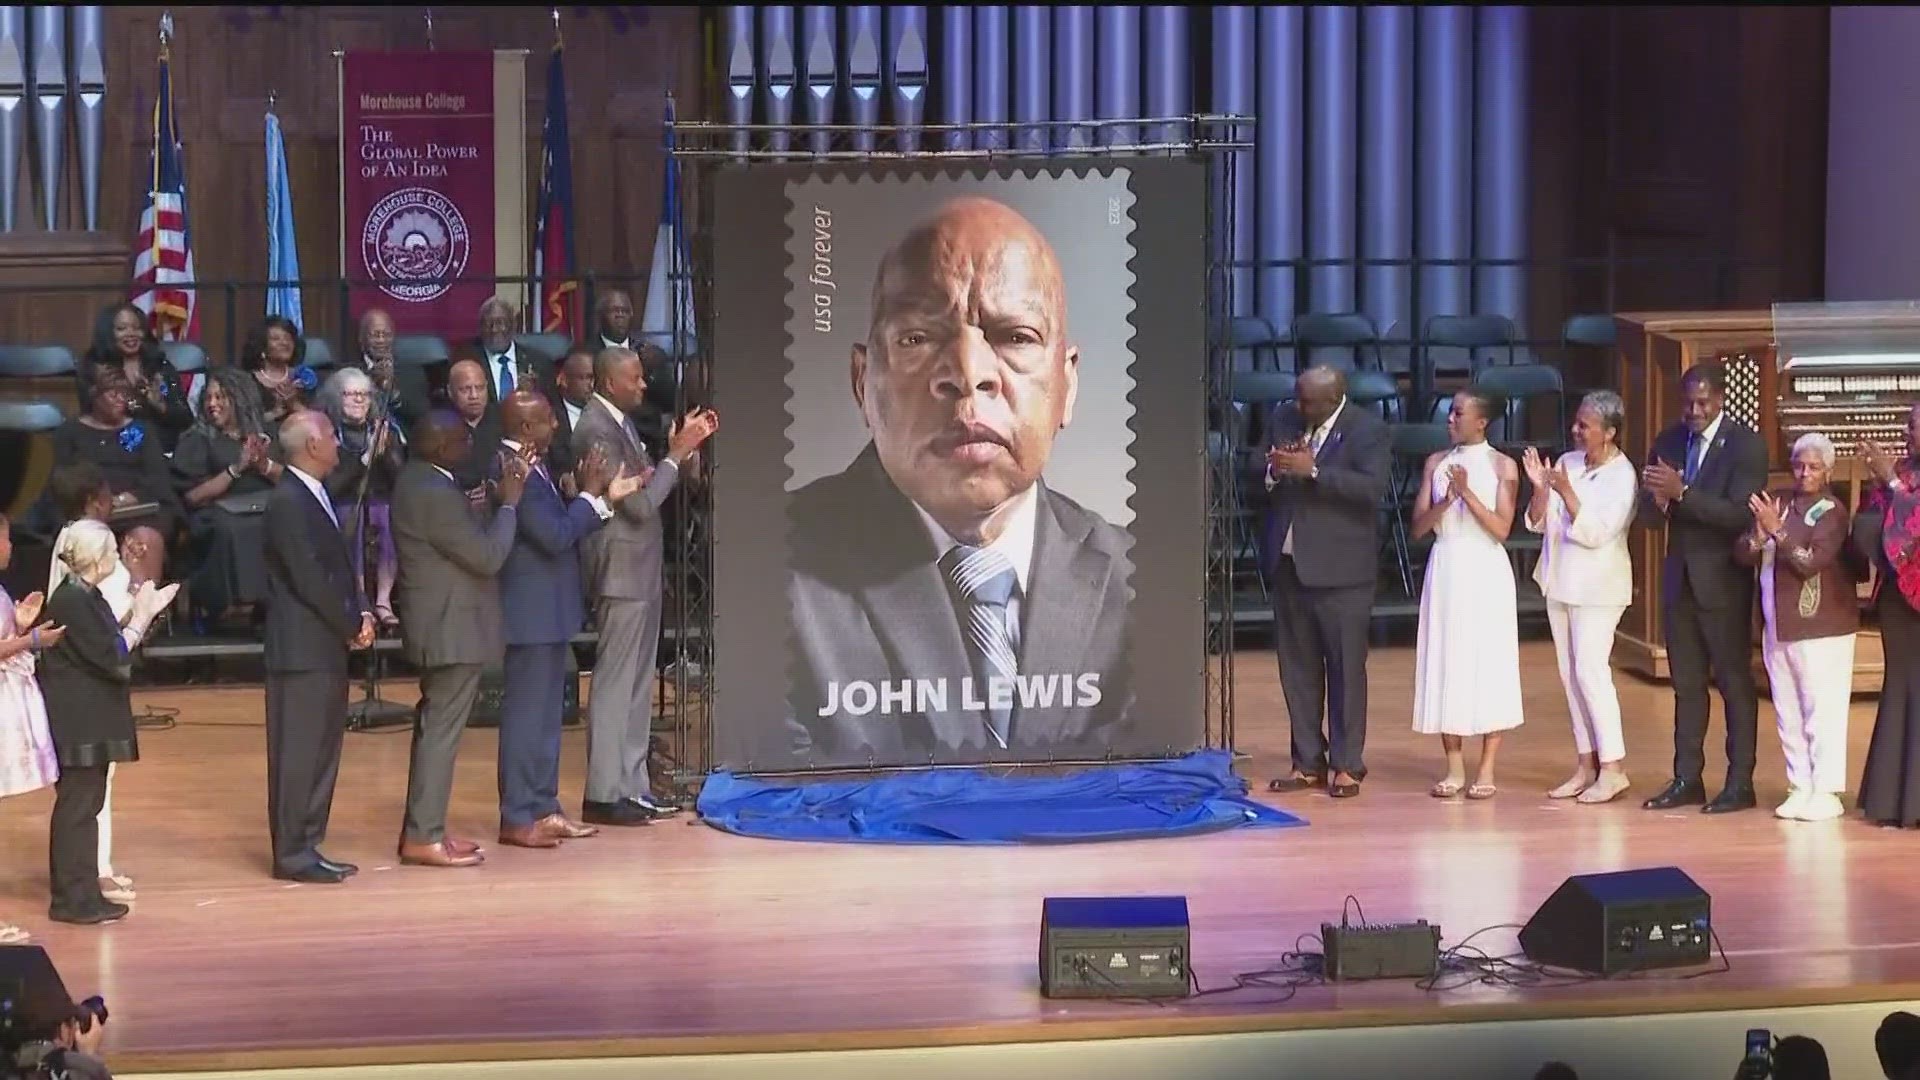 Morehouse College served as the backdrop for the unveiling of a new forever stamp from the U.S. Postal Service for John Lewis.